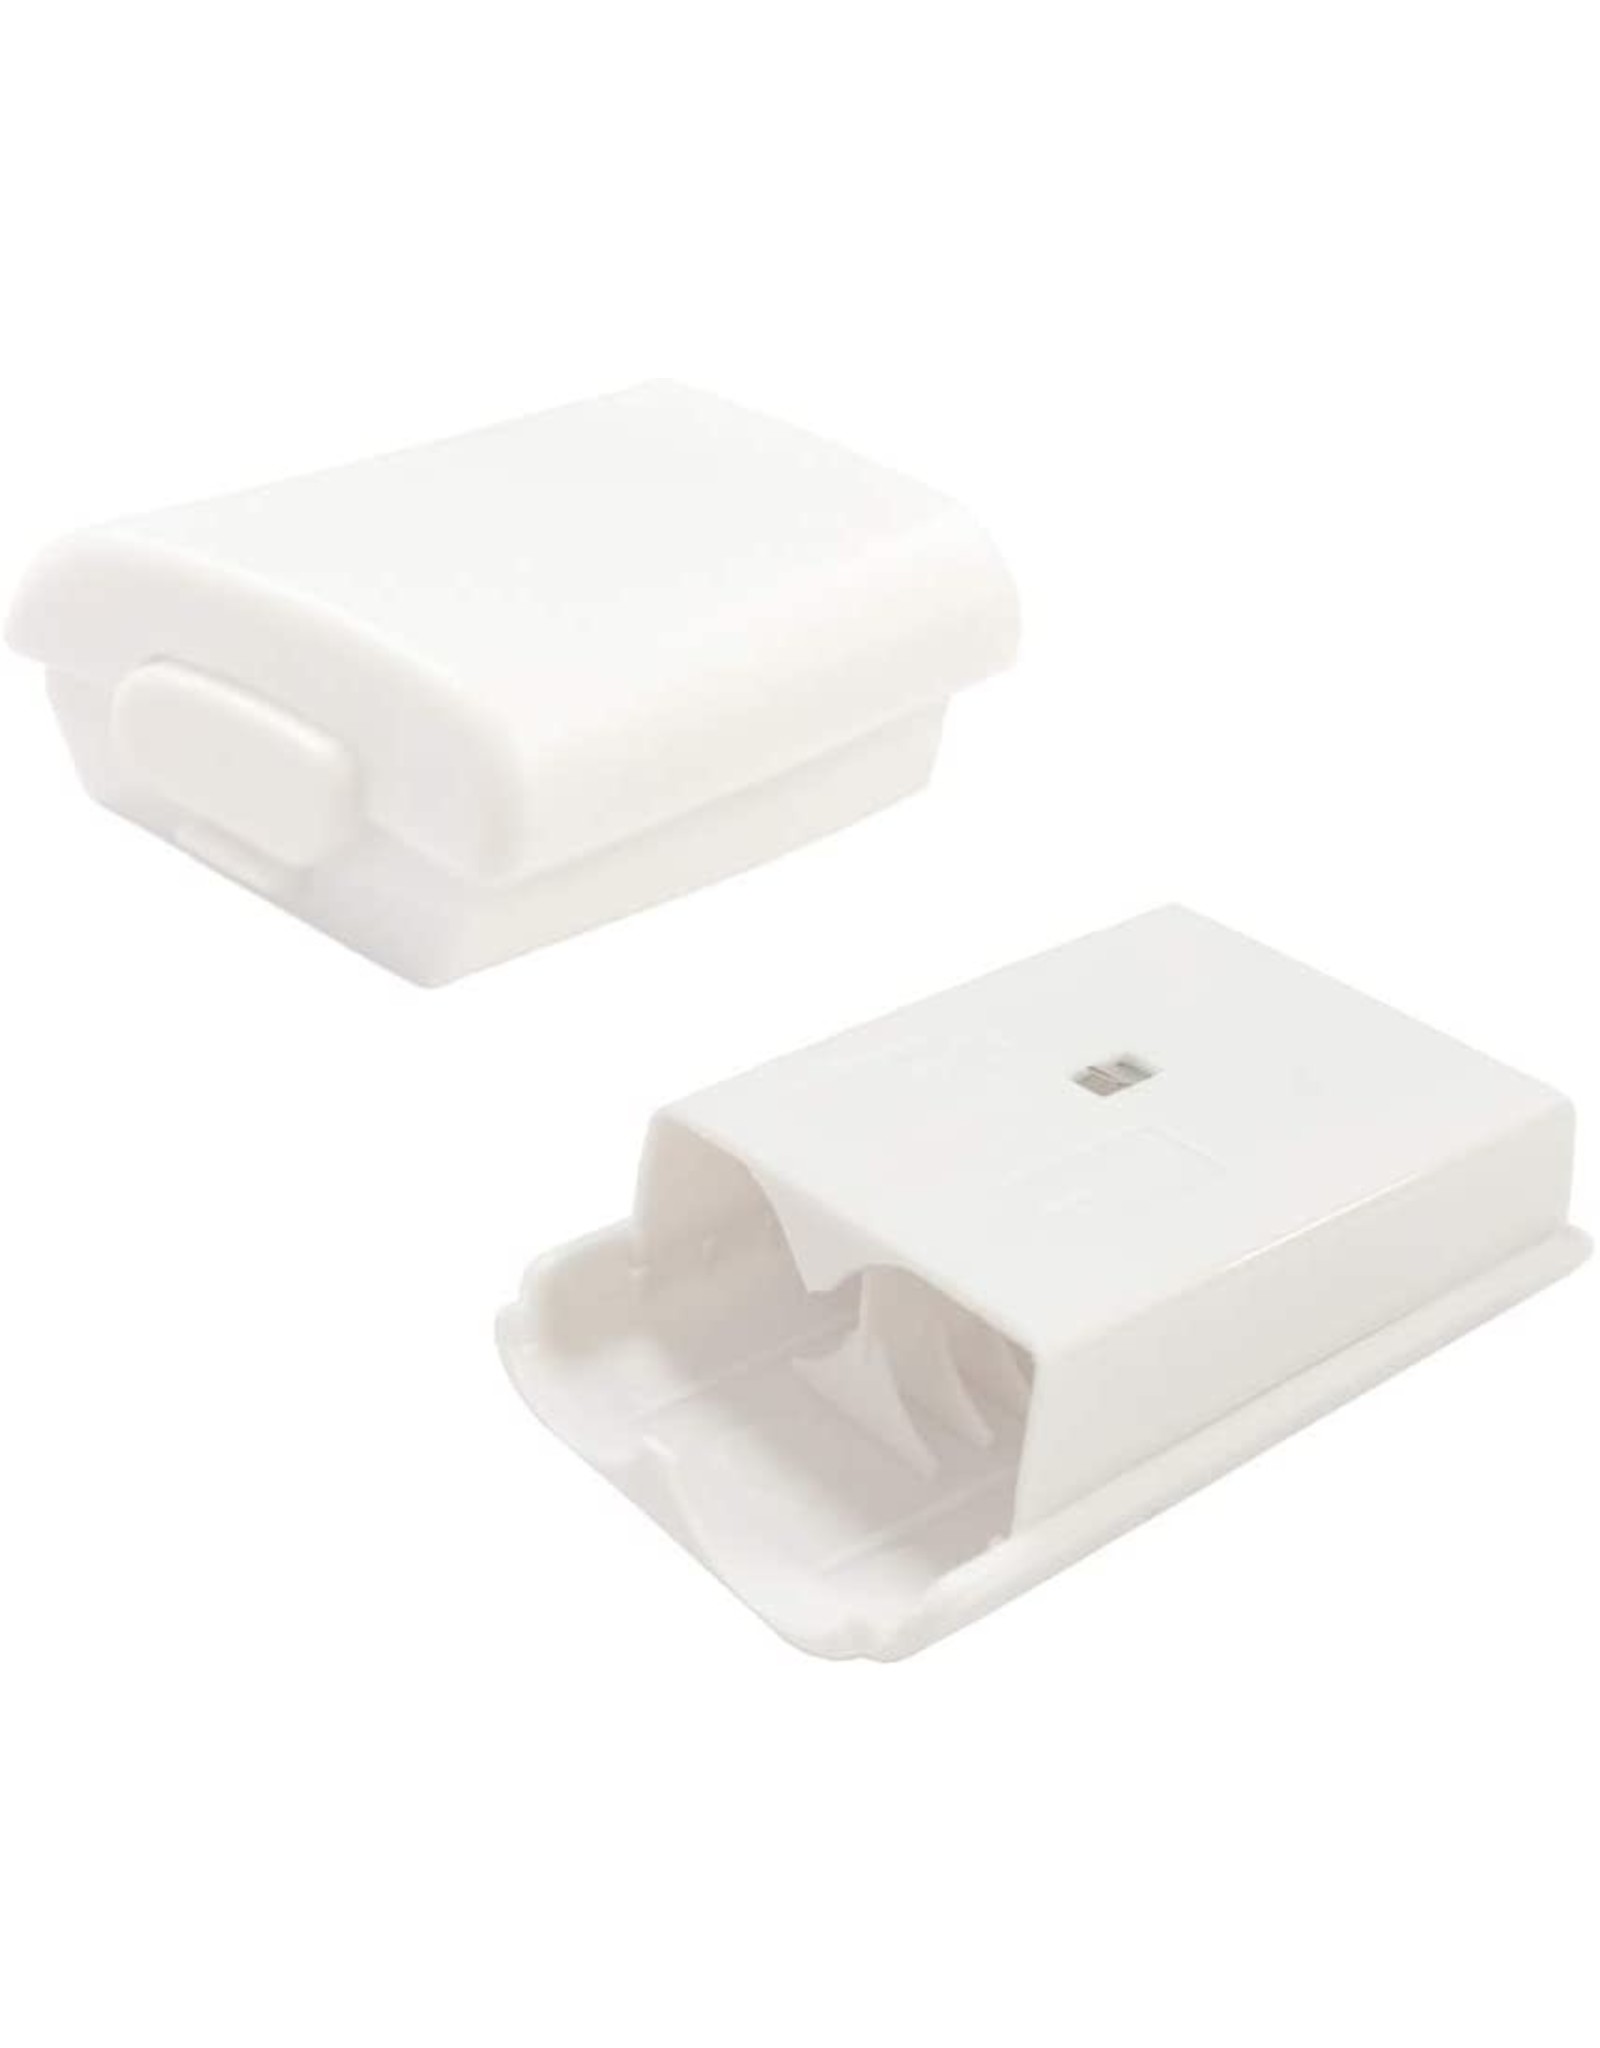 Xbox 360 Xbox 360 Controller Battery Cover - White, 3rd Party (Brand New)